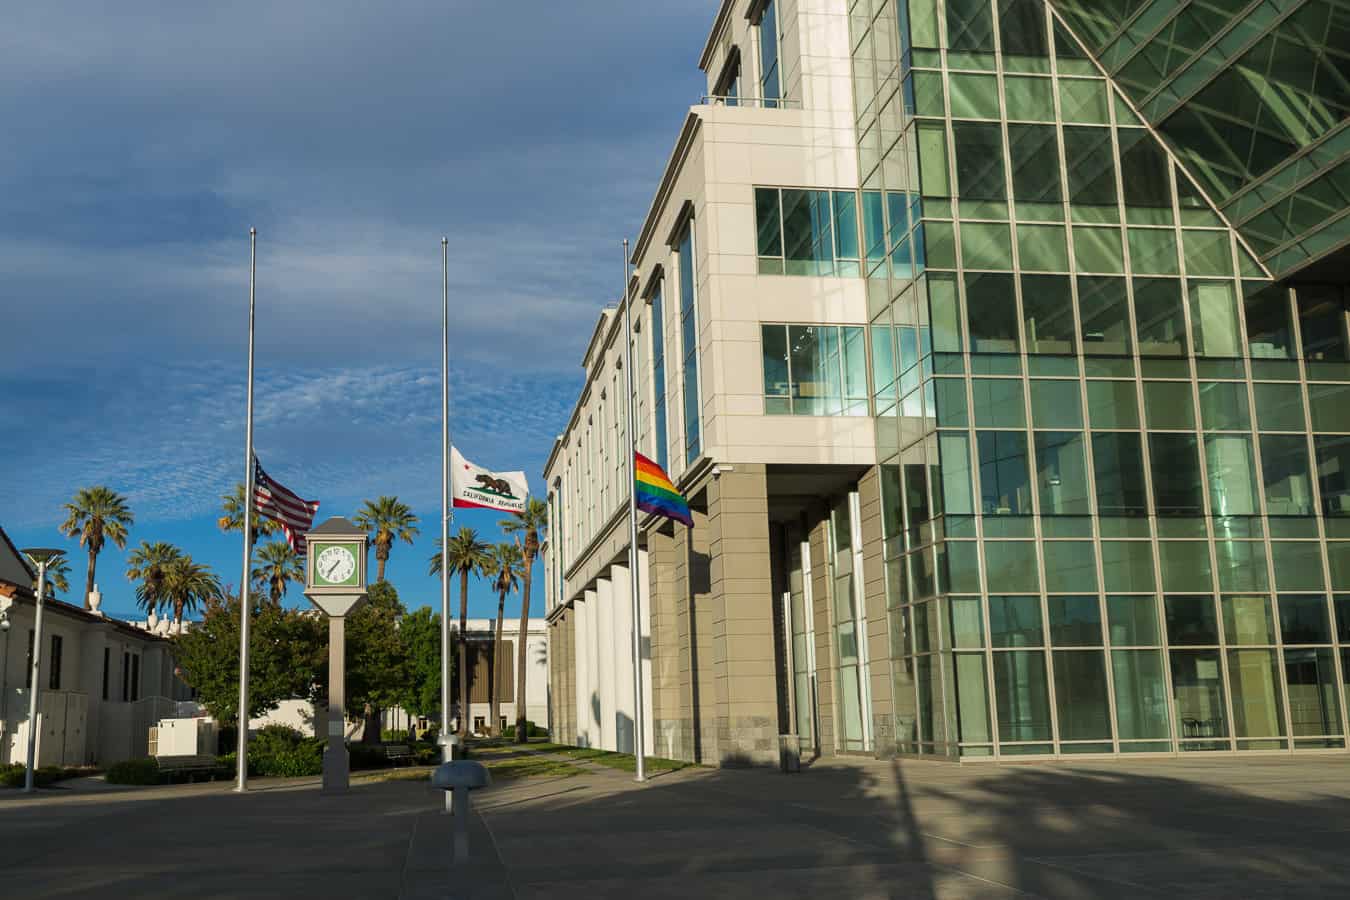 A United States flag, a state flag of California, and a Pride flag are blowing in the wind outside a city building in Fairfield, CA.